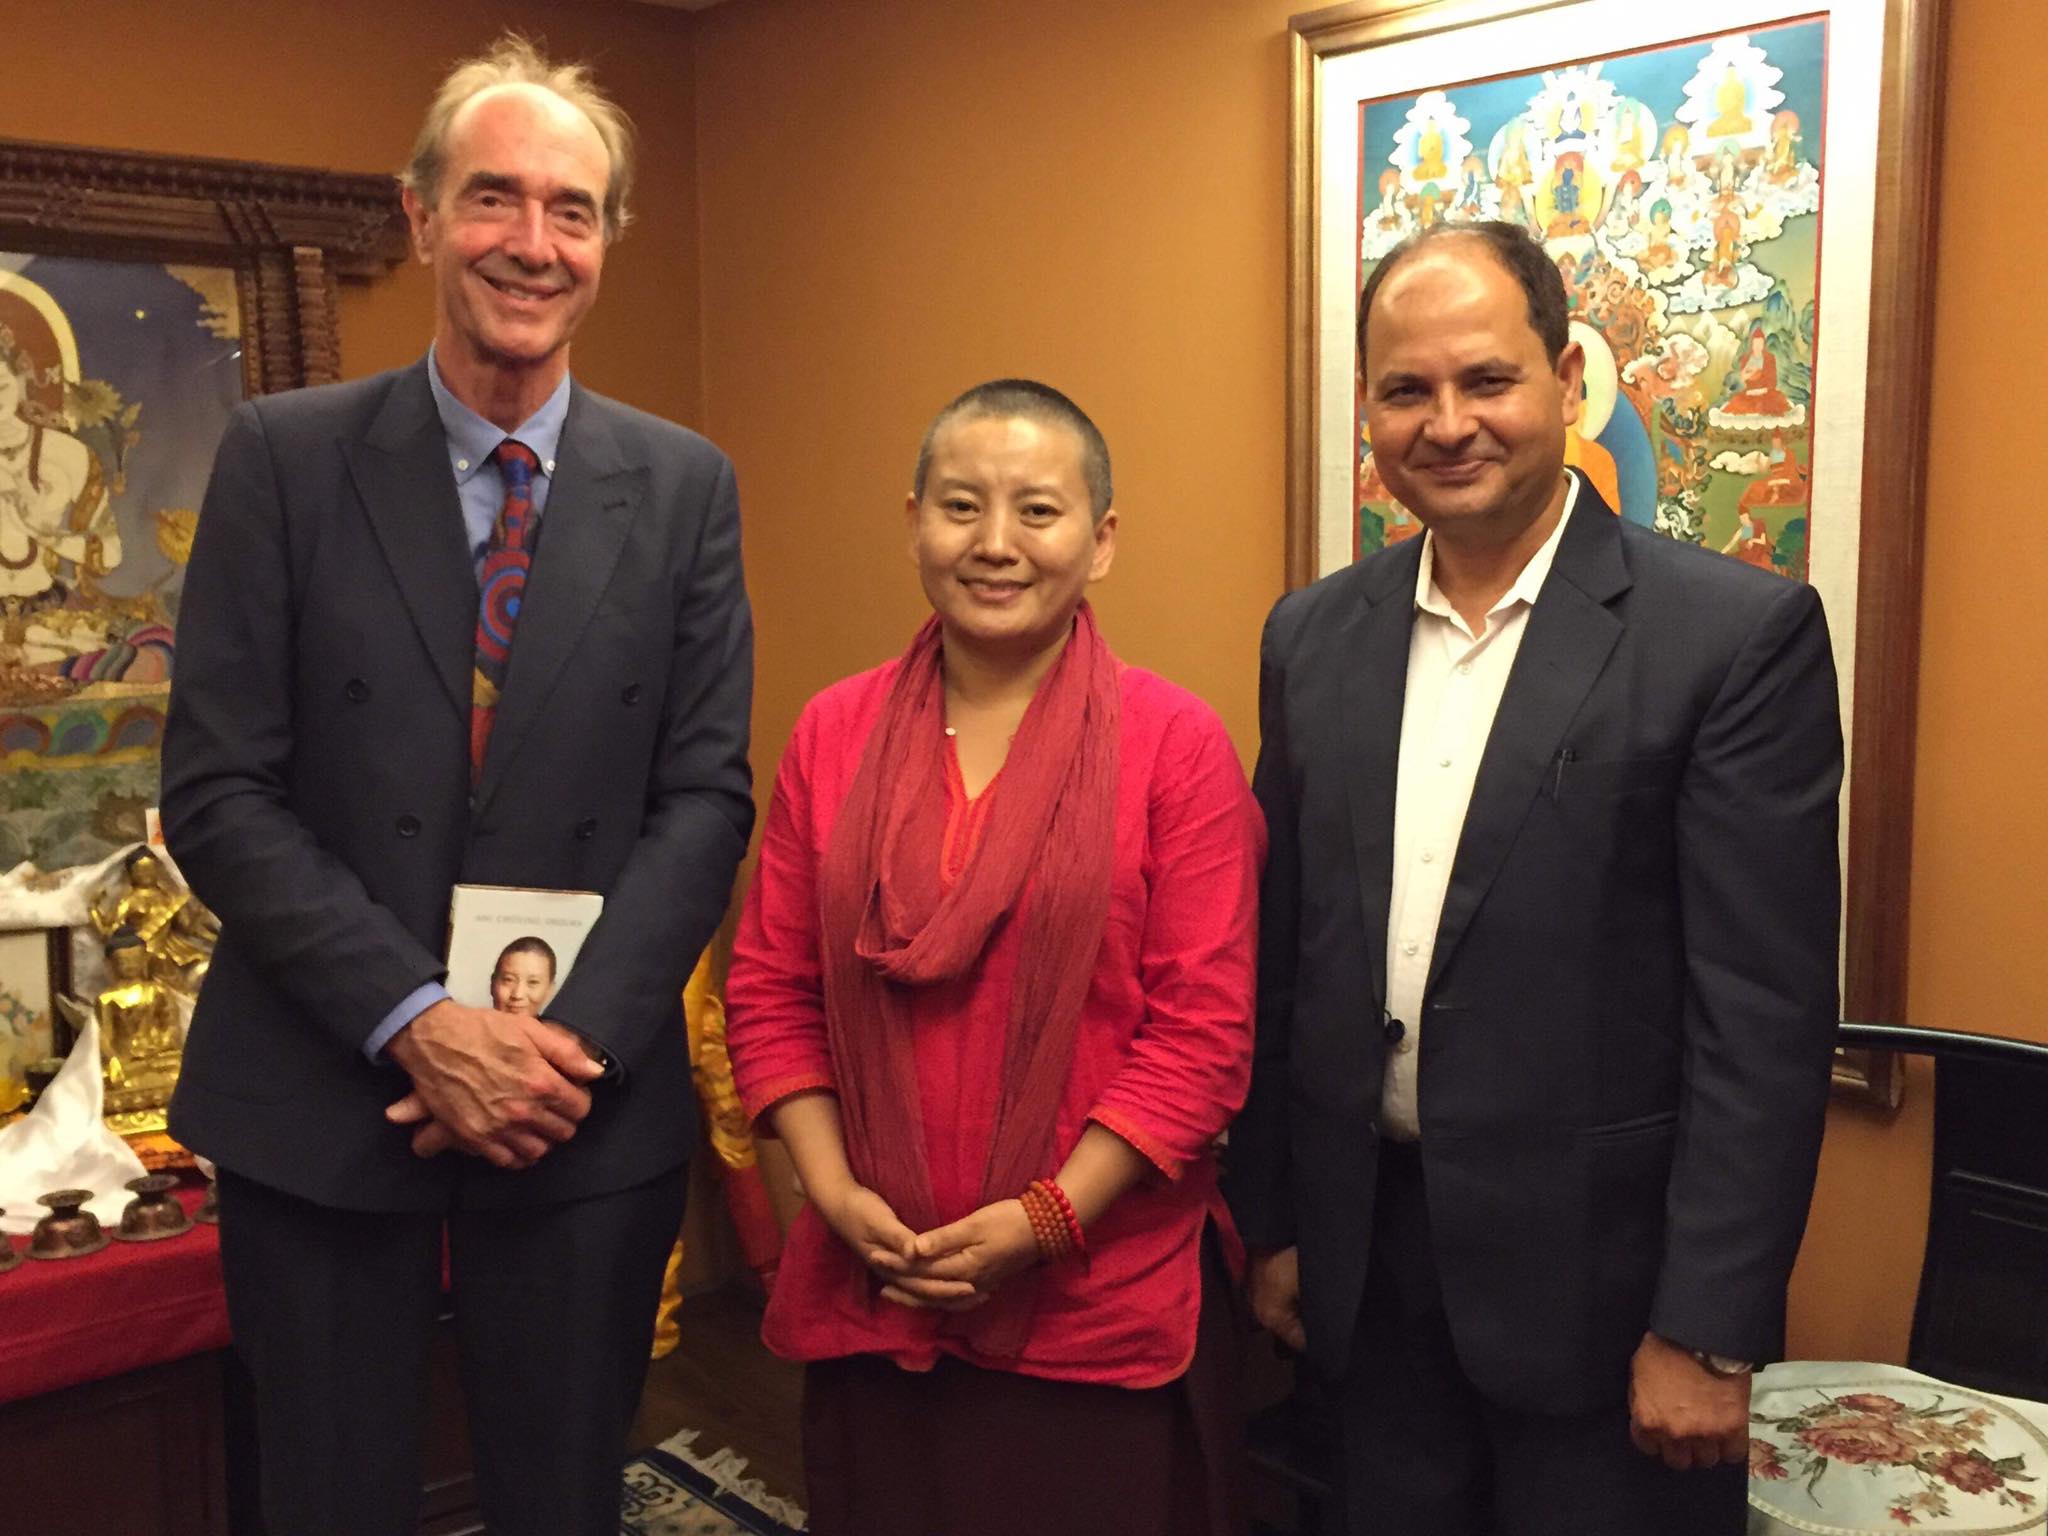 Meeting with spiritual leader and singer Ms Ani Chhoing Drolma along with Laureate Professor Roger Smith AM to discuss potential collaboration to educate community through singing health messages.